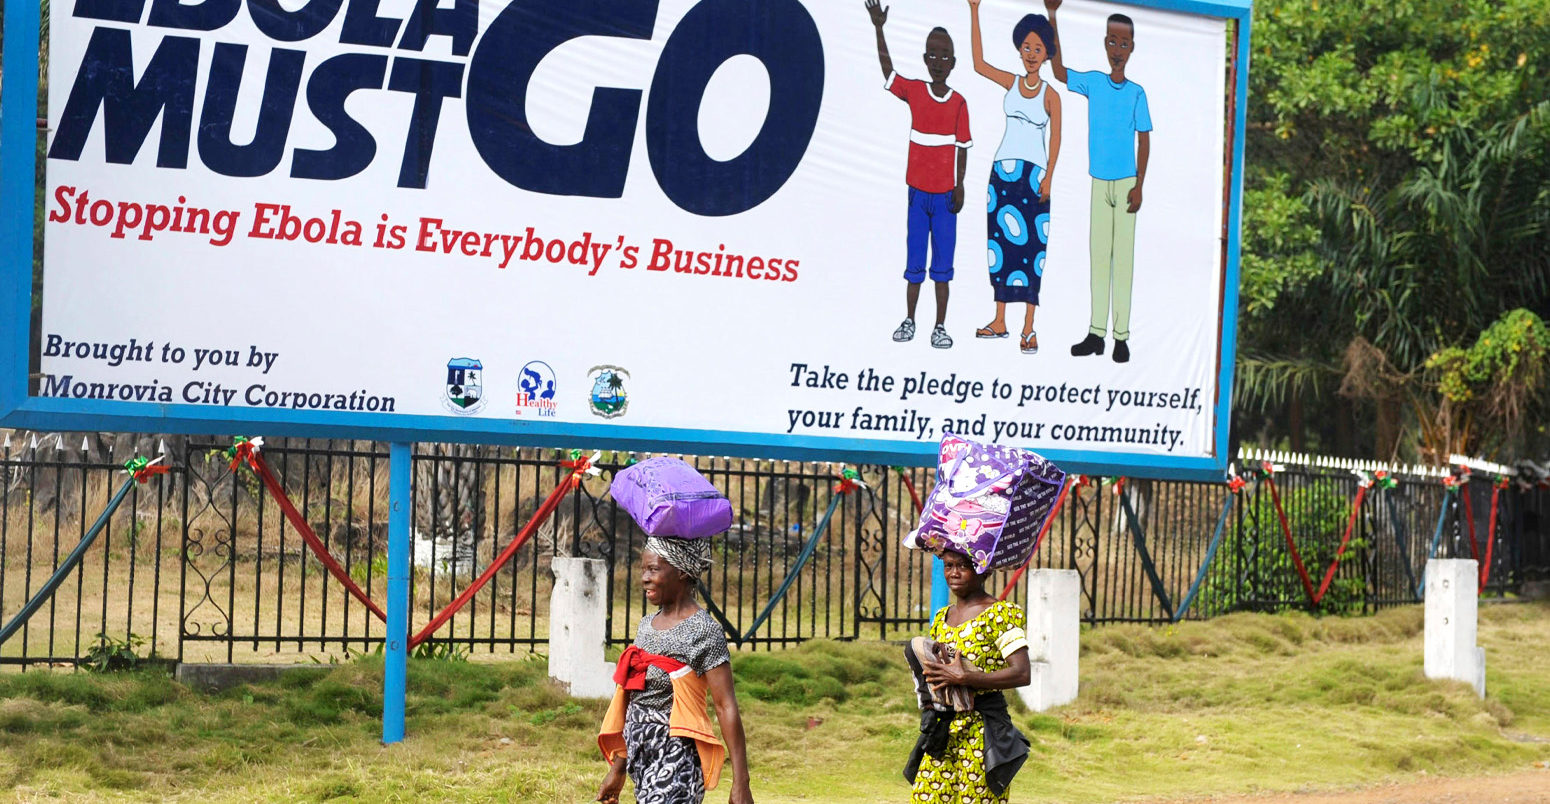 A public service billboard asking everyone to help stop the Ebola outbreak, 15 January 2015, in Monrovia, Liberia. Credit: UNMIL / Alamy Stock Photo. F155K4